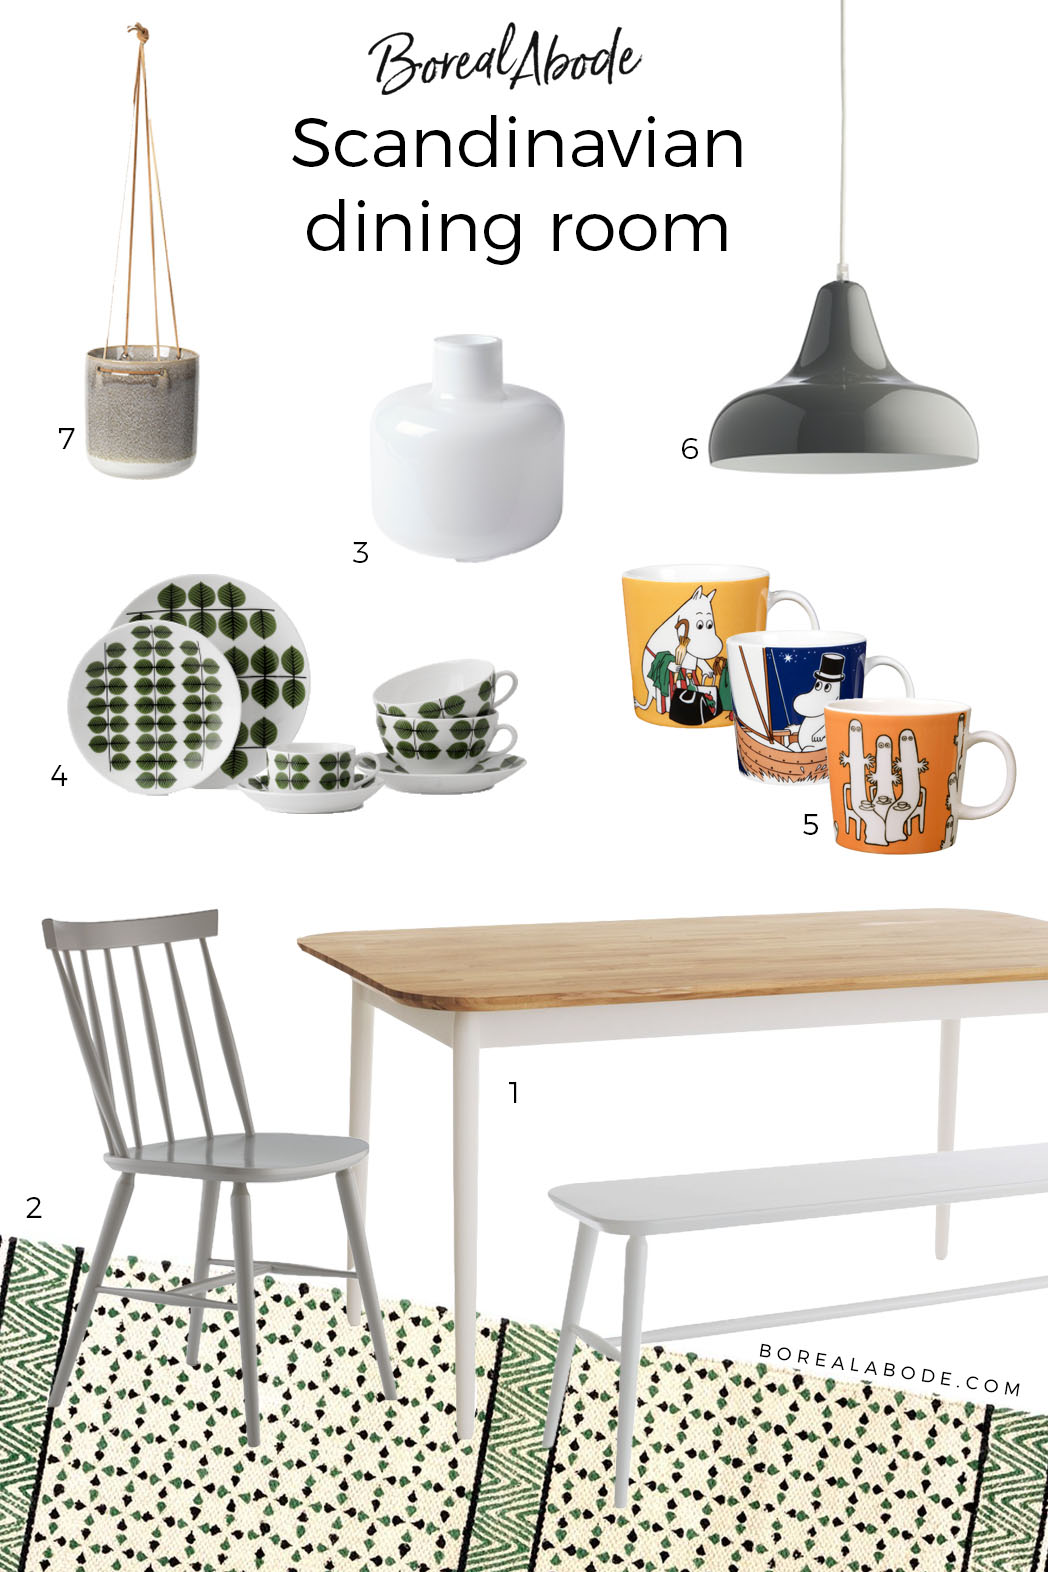 A Scandinavian dining room inspired by nature - mood board